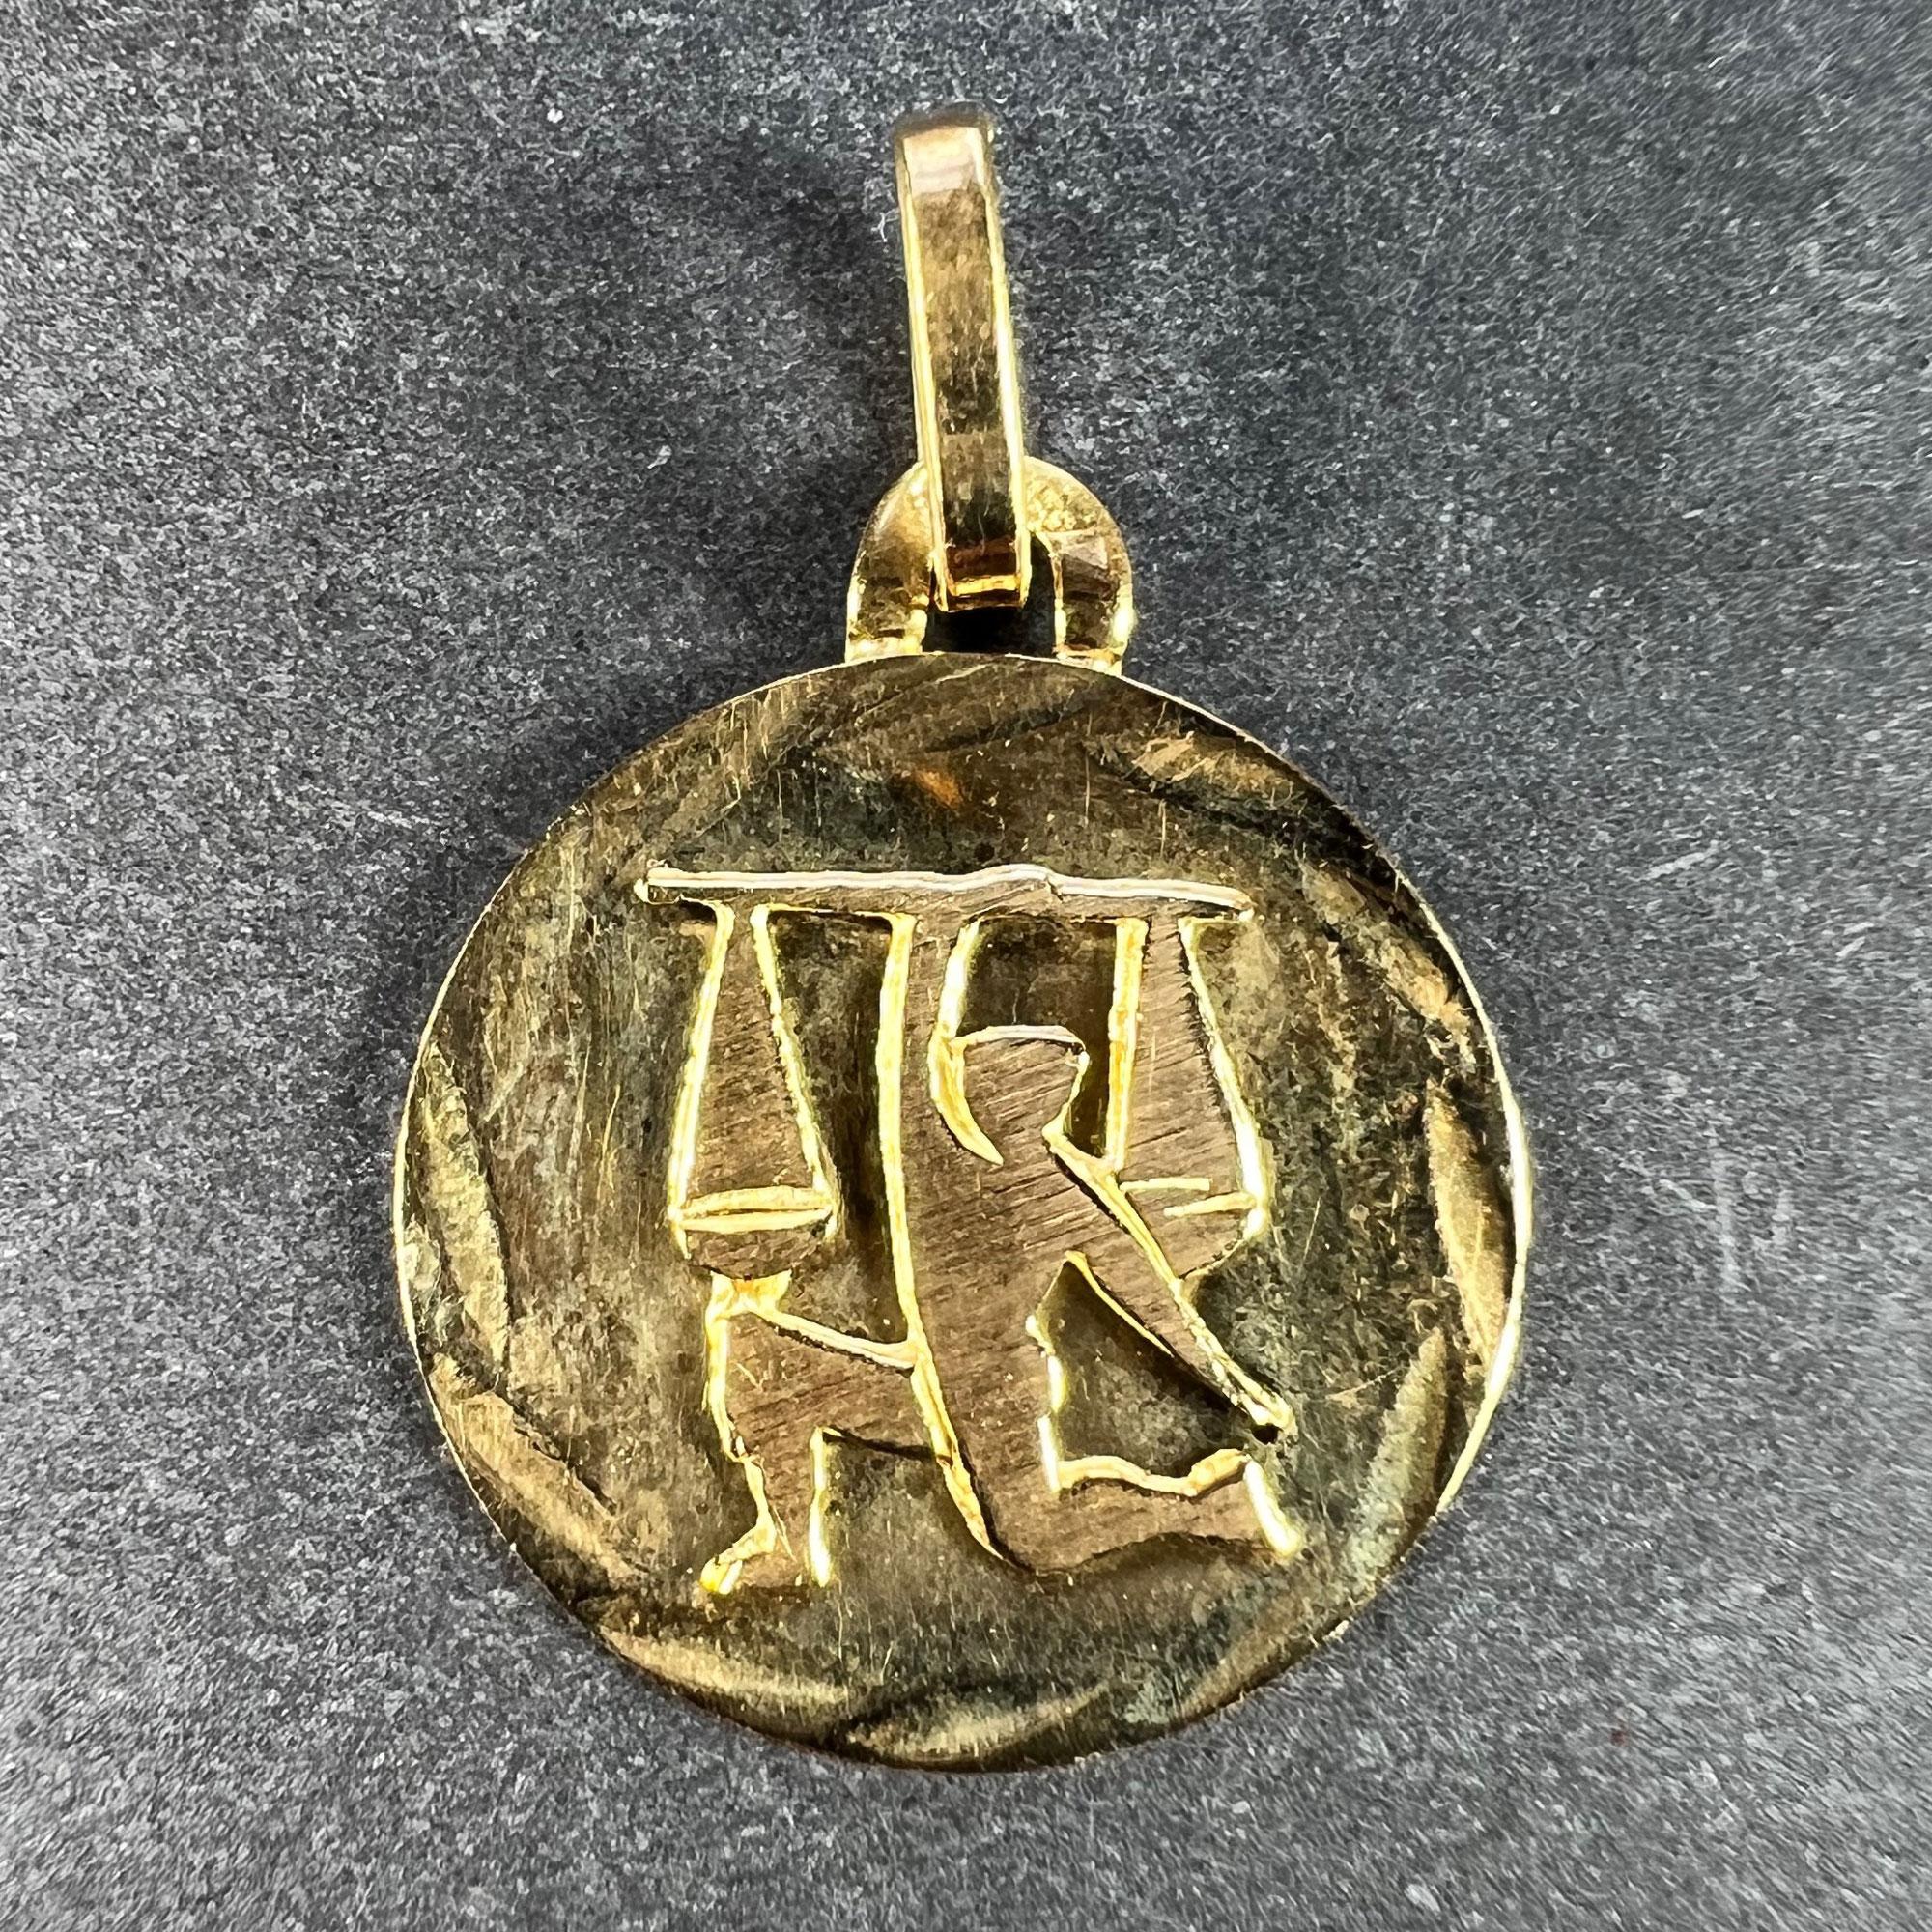 An 18 karat (18K) yellow gold charm pendant designed as the Zodiac sign of Libra, depicting a figure holding a set of balance scales aloft. Stamped with the eagle mark for 18 karat gold and French manufacture with an unknown makers